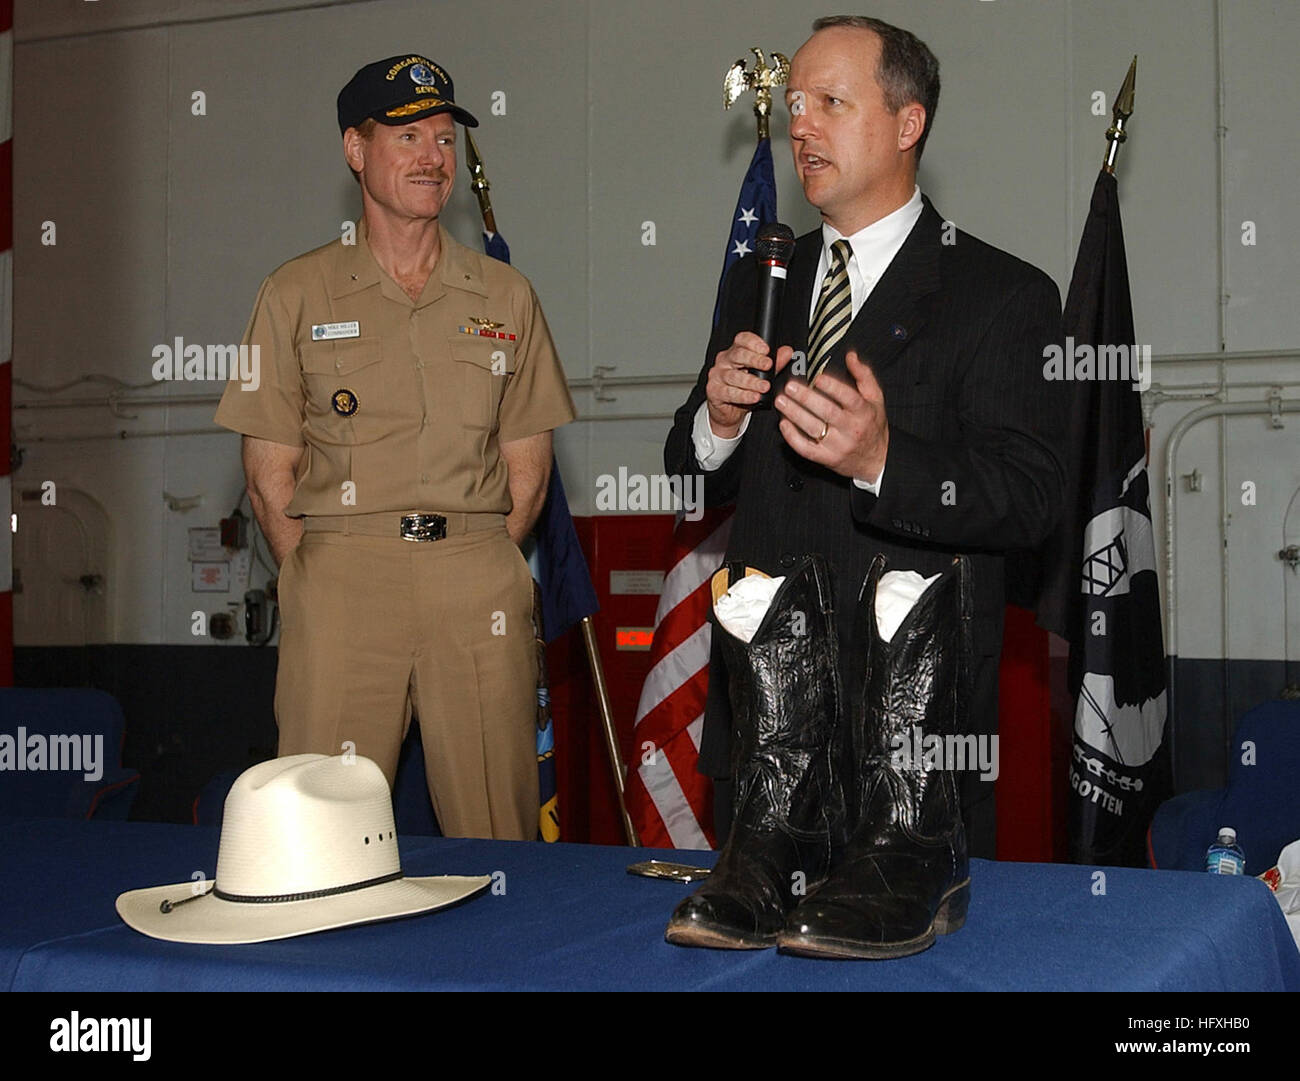 051221-N-2532P-030 San Diego (Dec. 21, 2005) - Executive Director of the Ronald Reagan Presidential Library, Duke Blackwood, right, explains the history of a pair of boots and cowboy hat worn by President Ronald Reagan, during a Dec. 21 memorabilia dedication ceremony aboard Nimitz-class aircraft carrier USS Ronald Reagan (CVN 76). Commander, Carrier Strike Group Seven (CSG-7) Rear Adm. Michael H. Miller accepted the items on behalf of the crew. U.S. Navy photo by Airman Zachary Pierce (RELEASED) US Navy 051221-N-2532P-030 Executive Director of the Ronald Reagan Presidential Library, Duke Blac Stock Photo